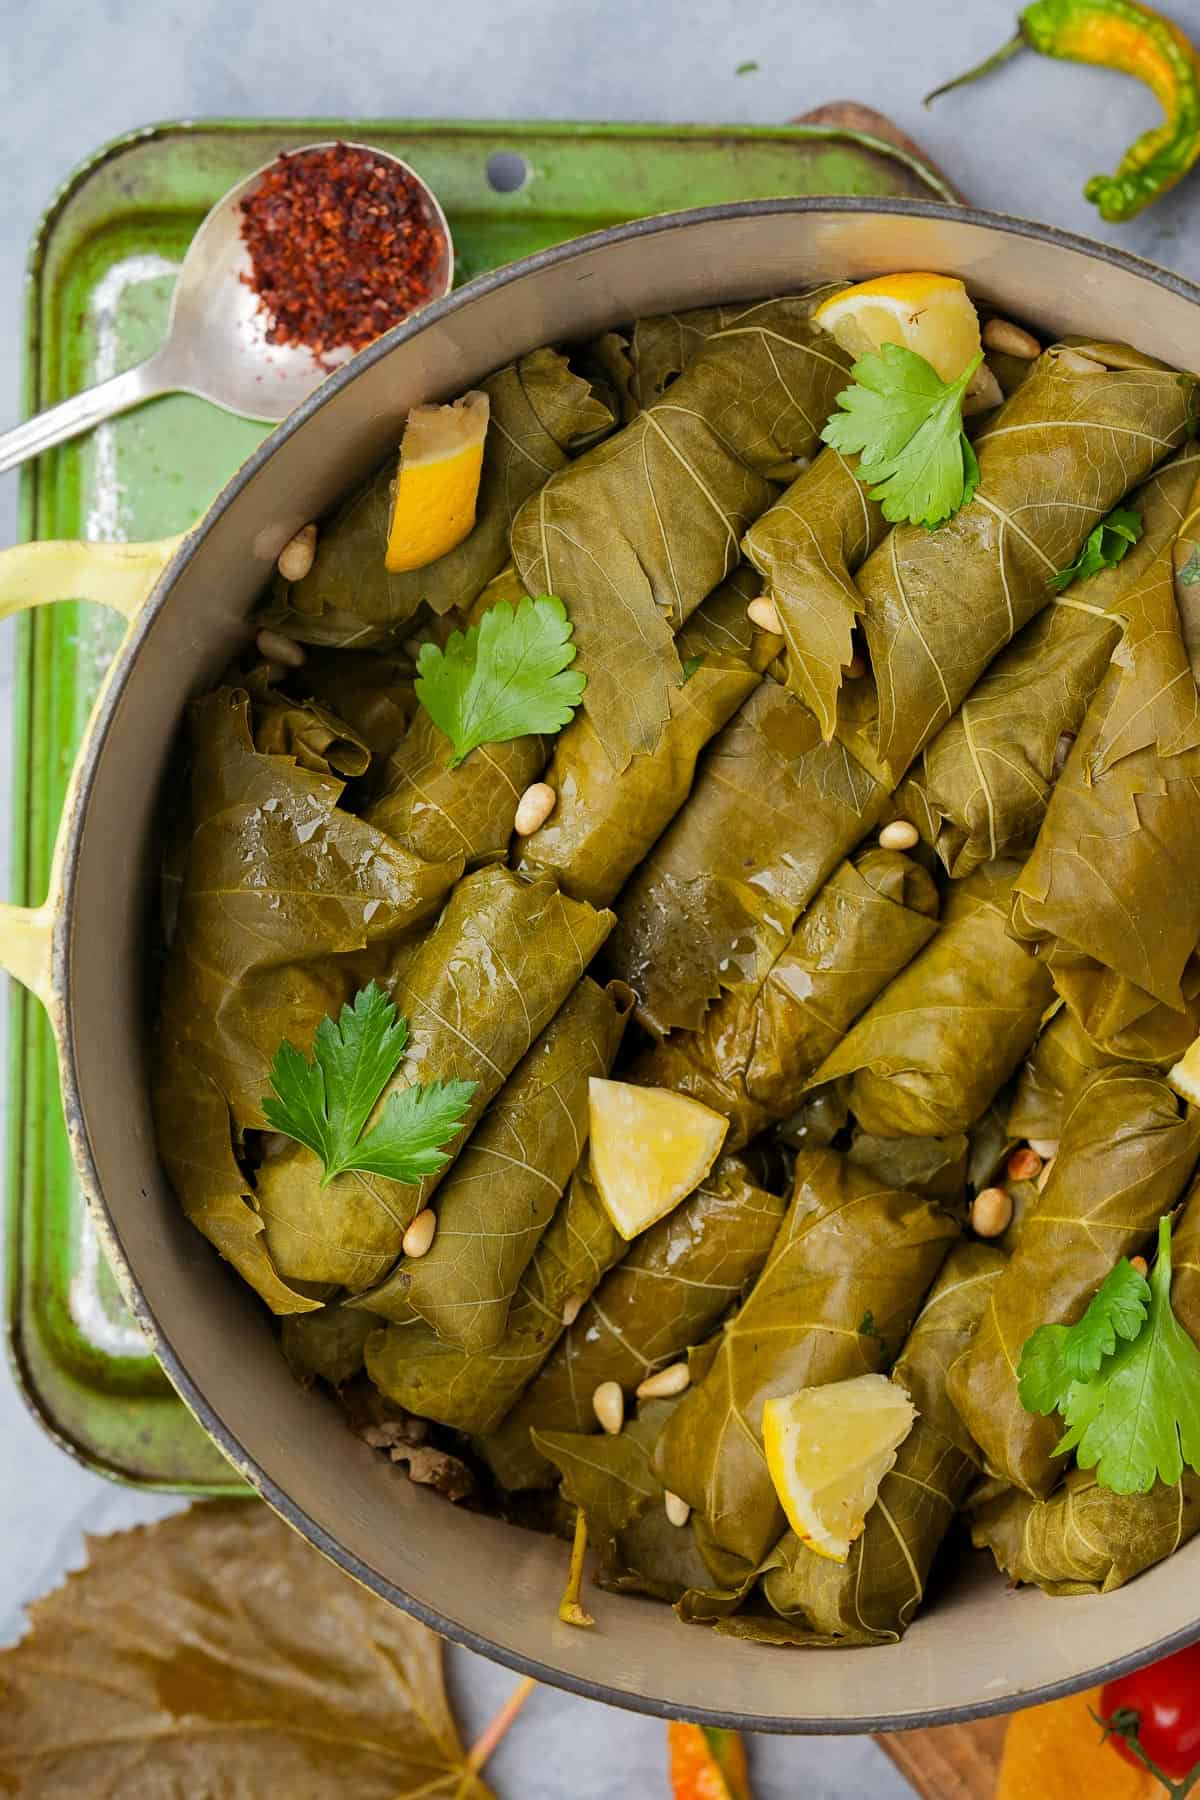 Stuffed grape leaves in a pot on a table.